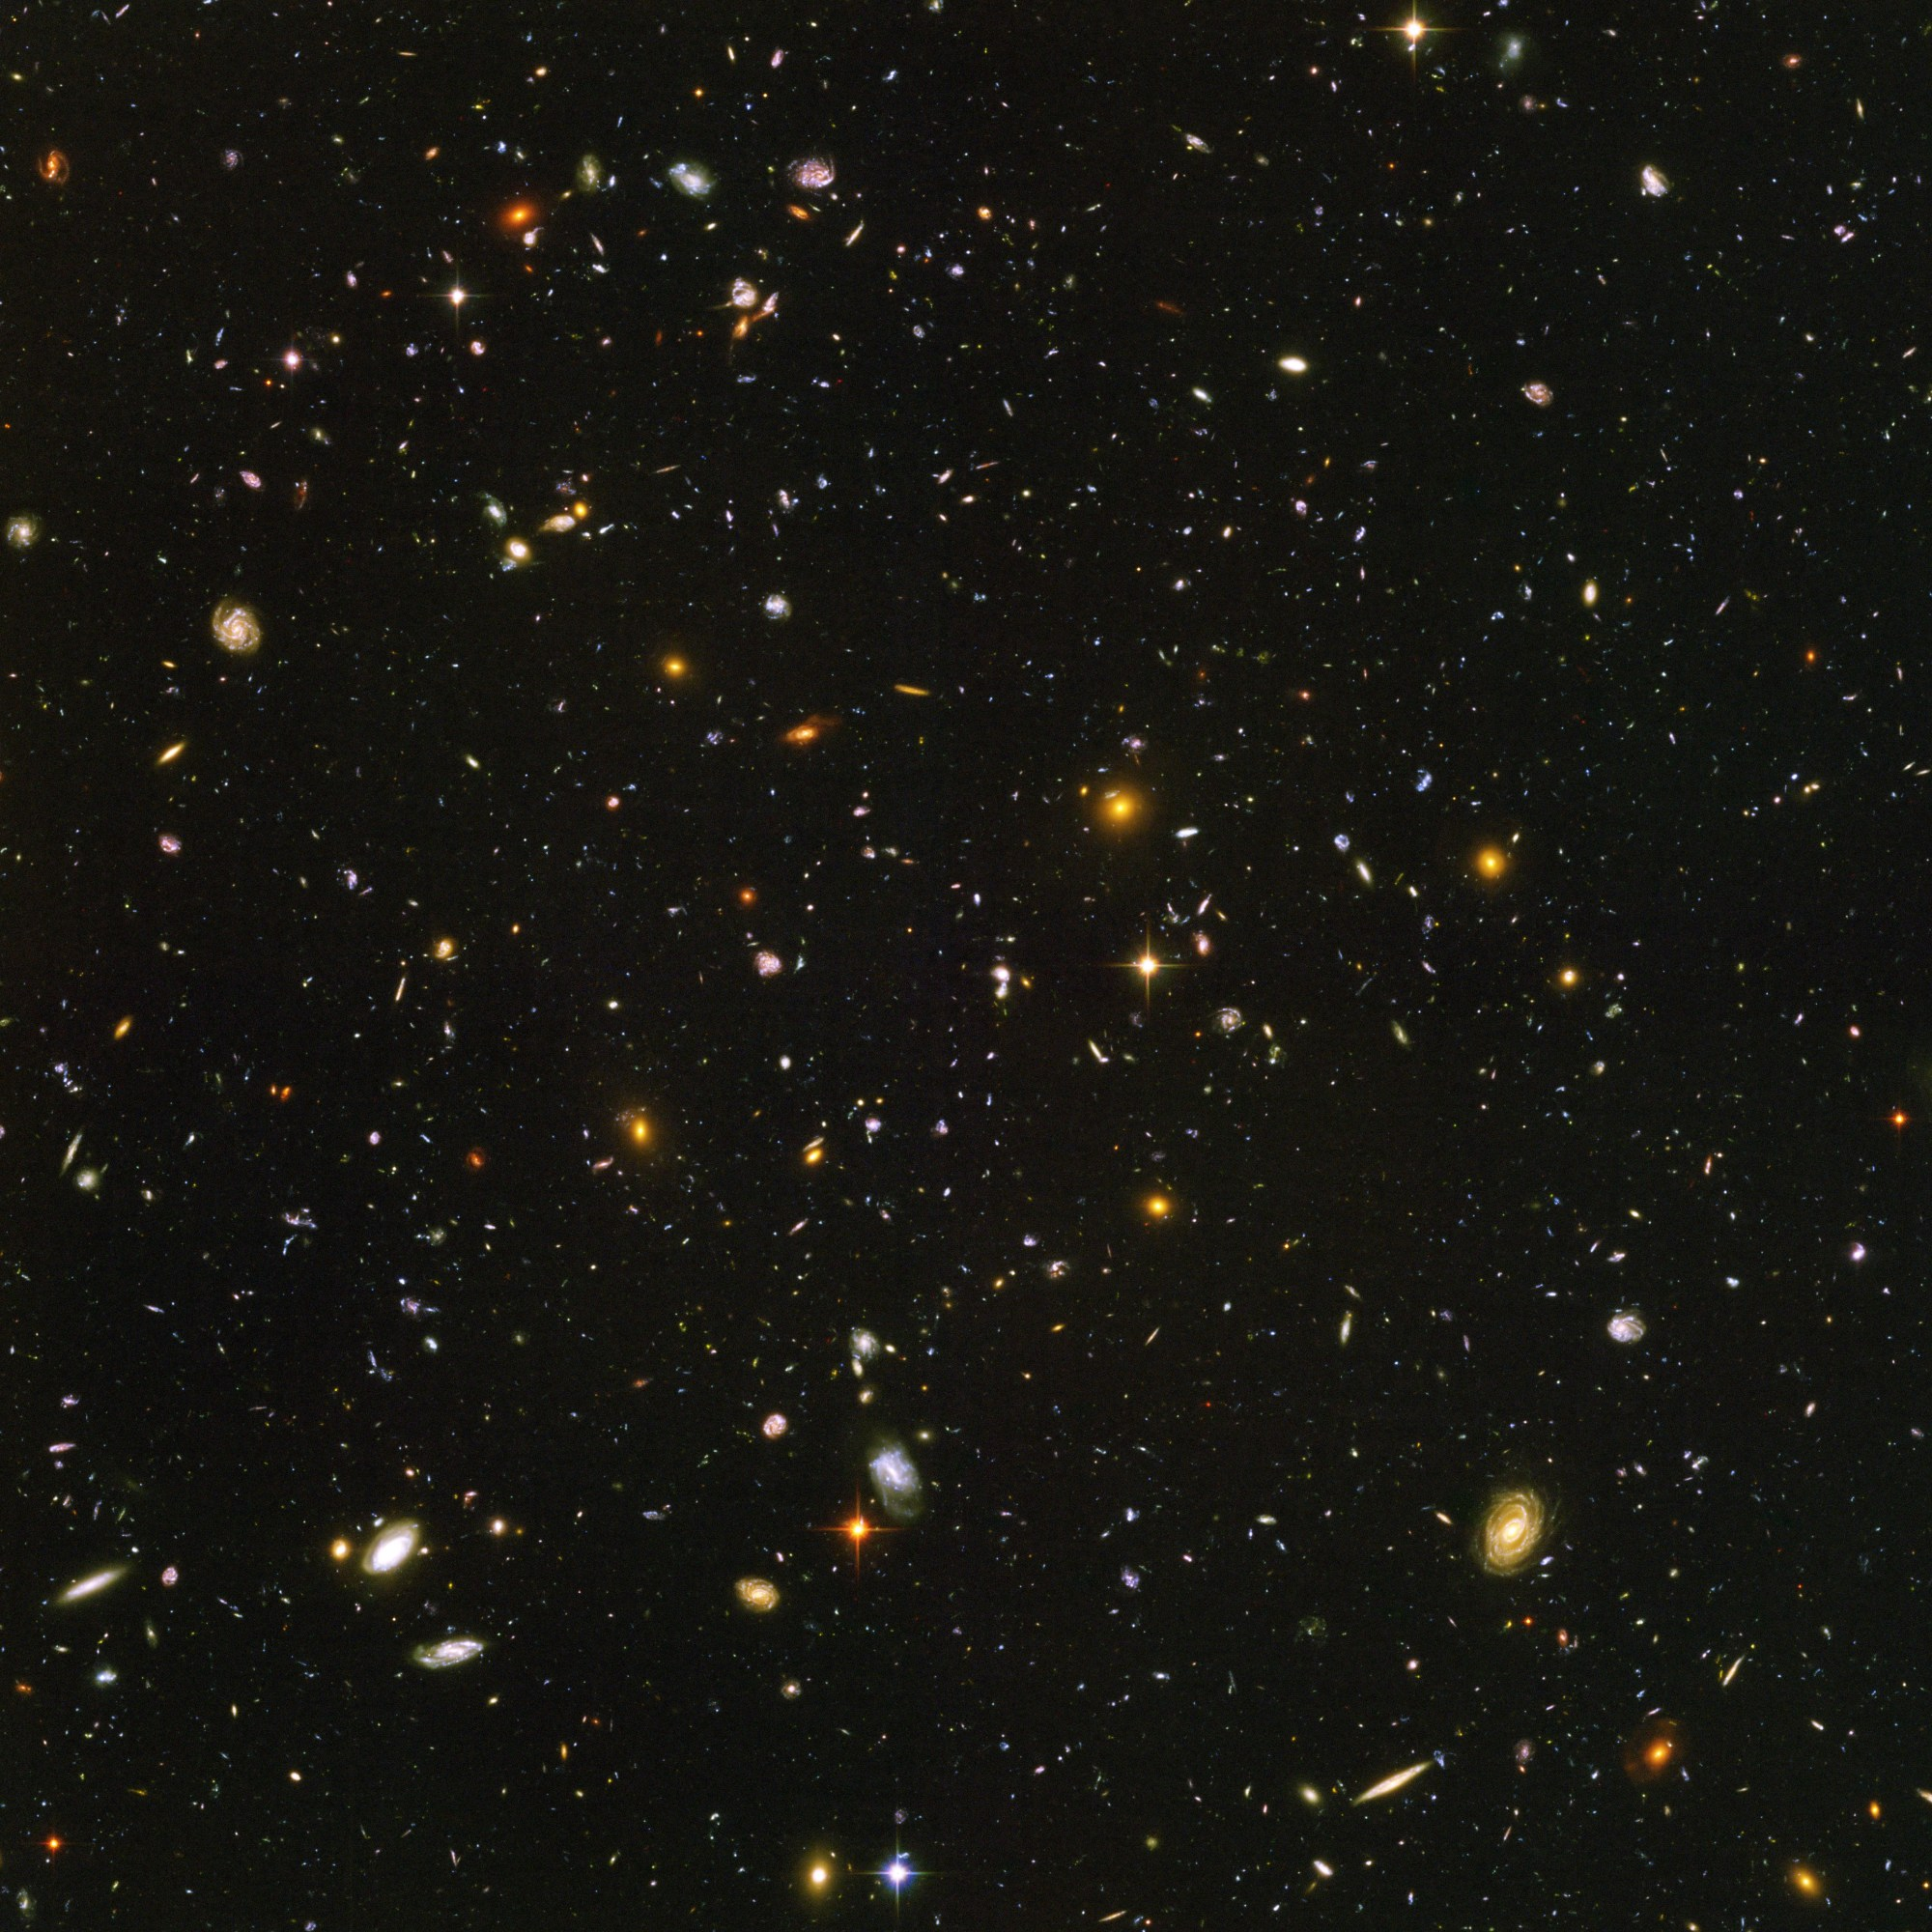 Field is filled with galaxies in colors of white, yellow, blue-white, and red; all on a black background.